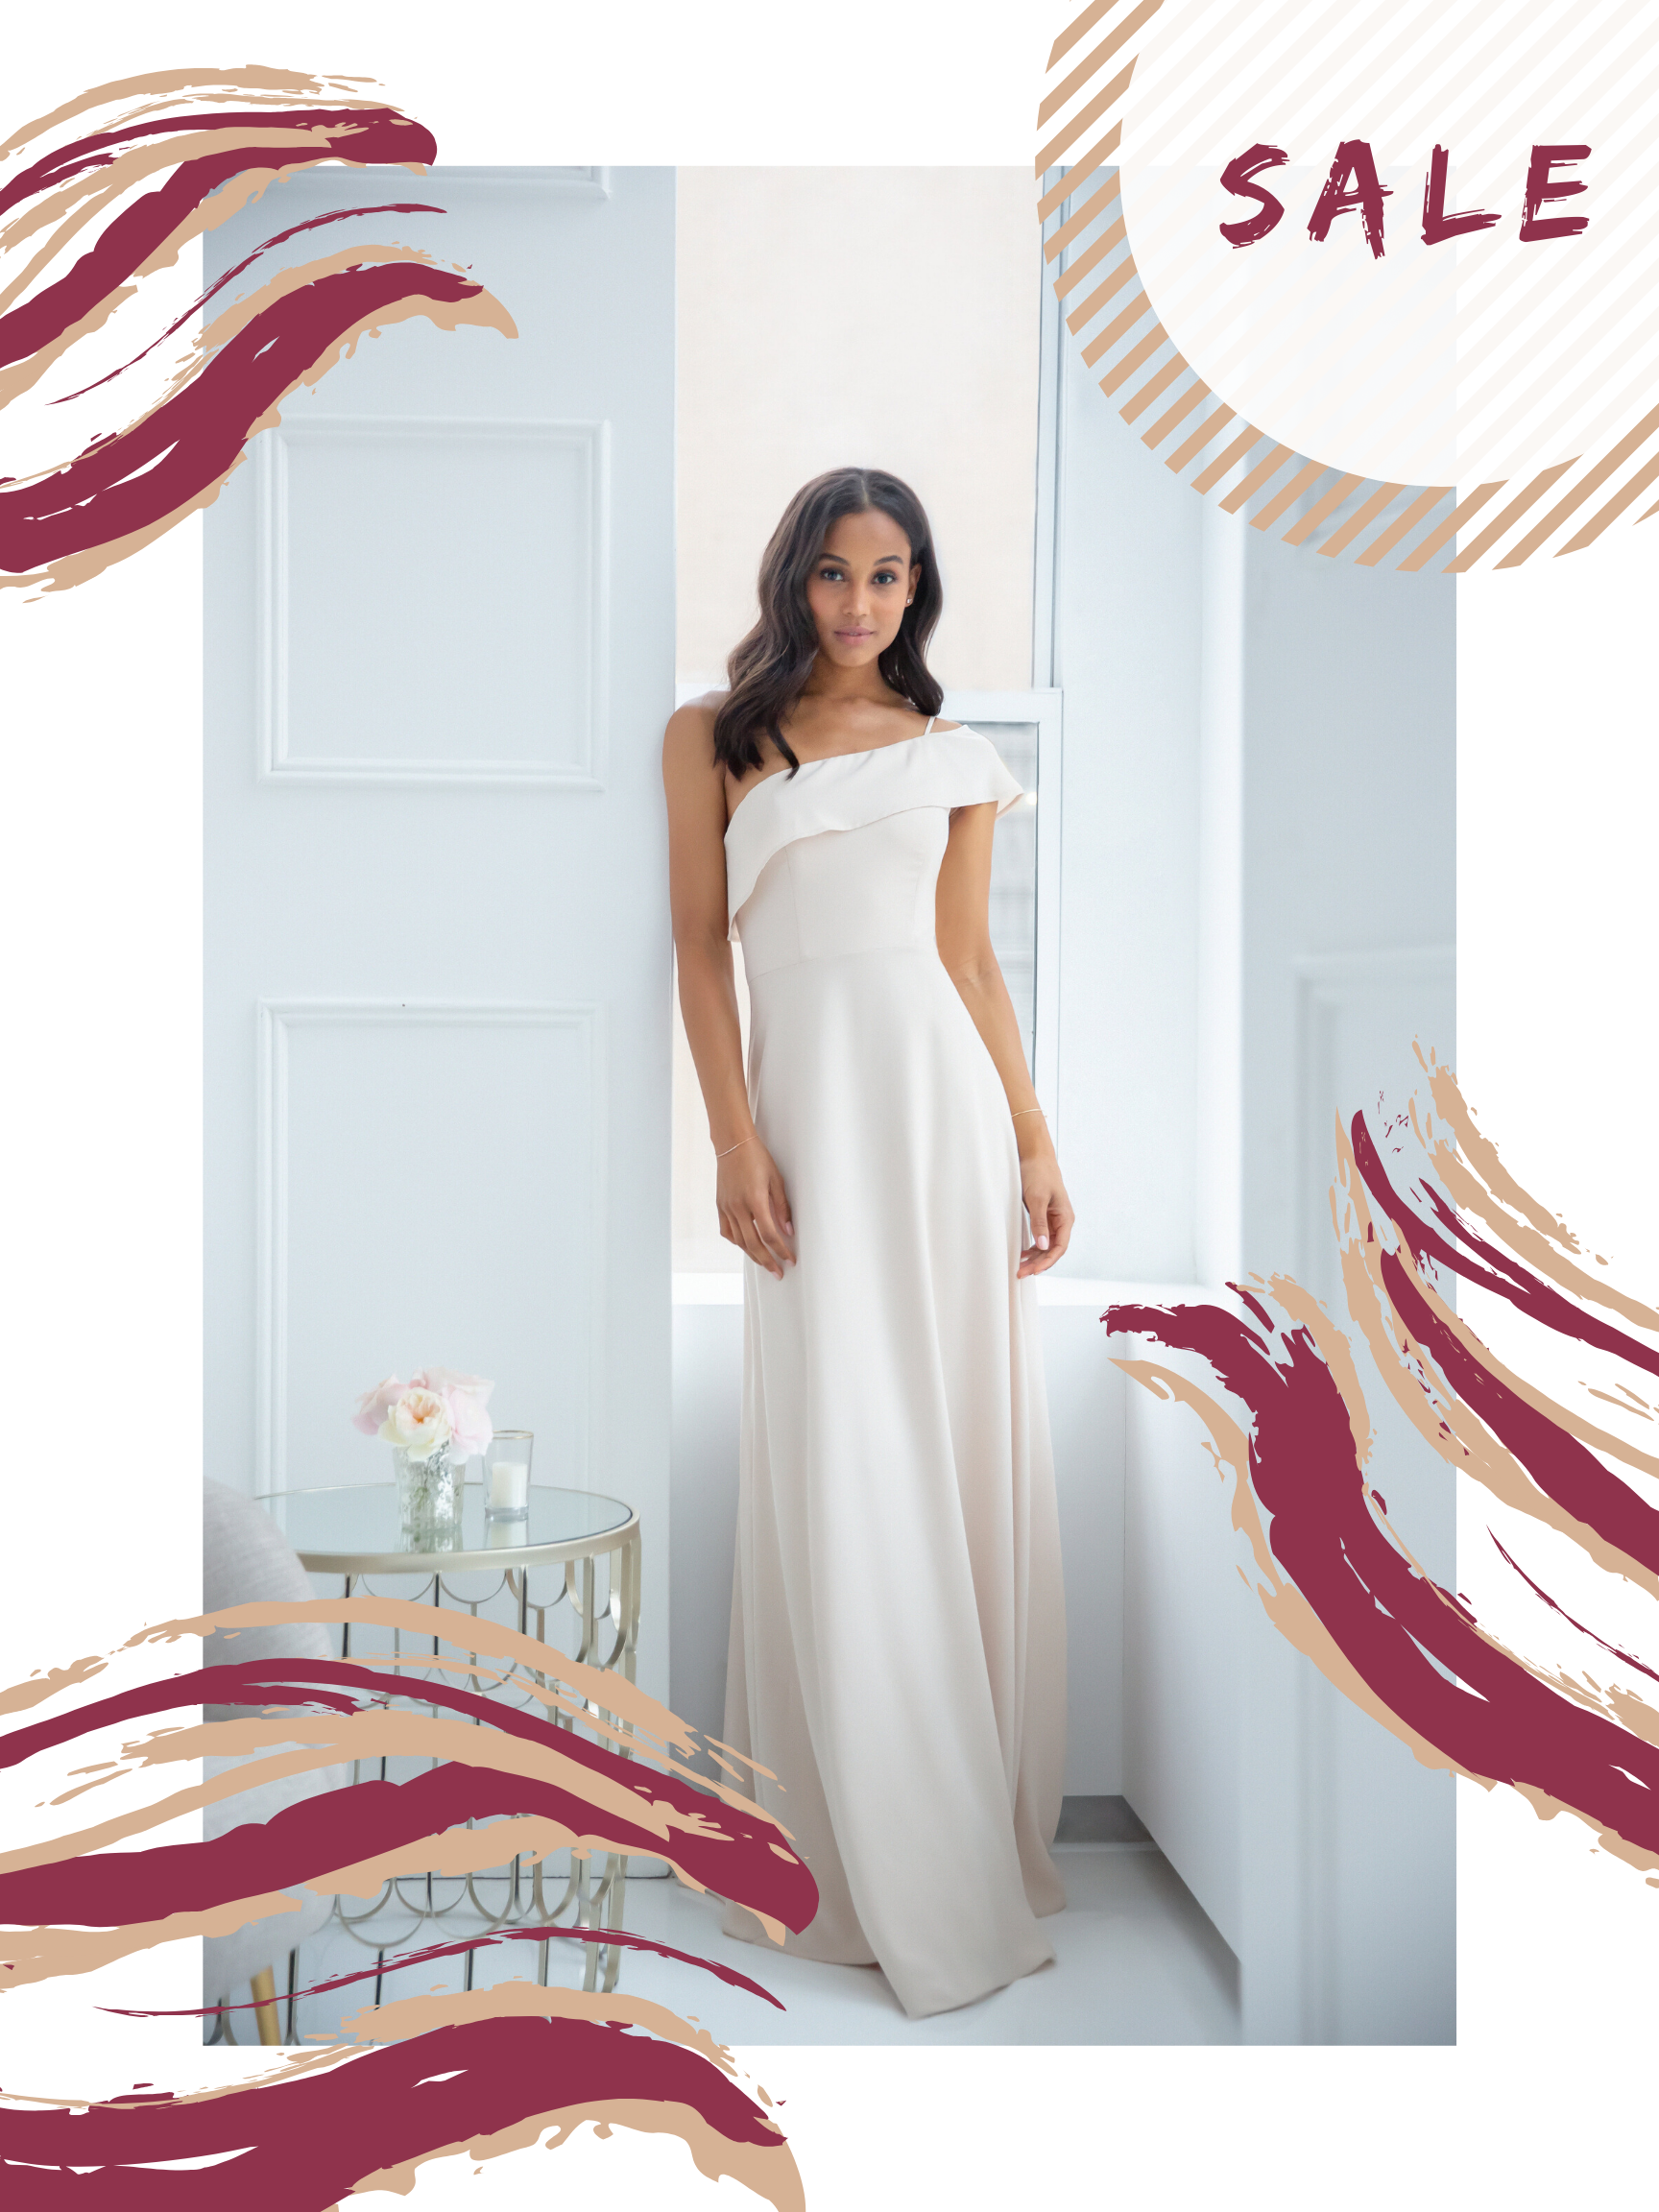 ivory-and-beau-blog-special-occasion-dresses-sale-savannah-bridal-boutique-2.png